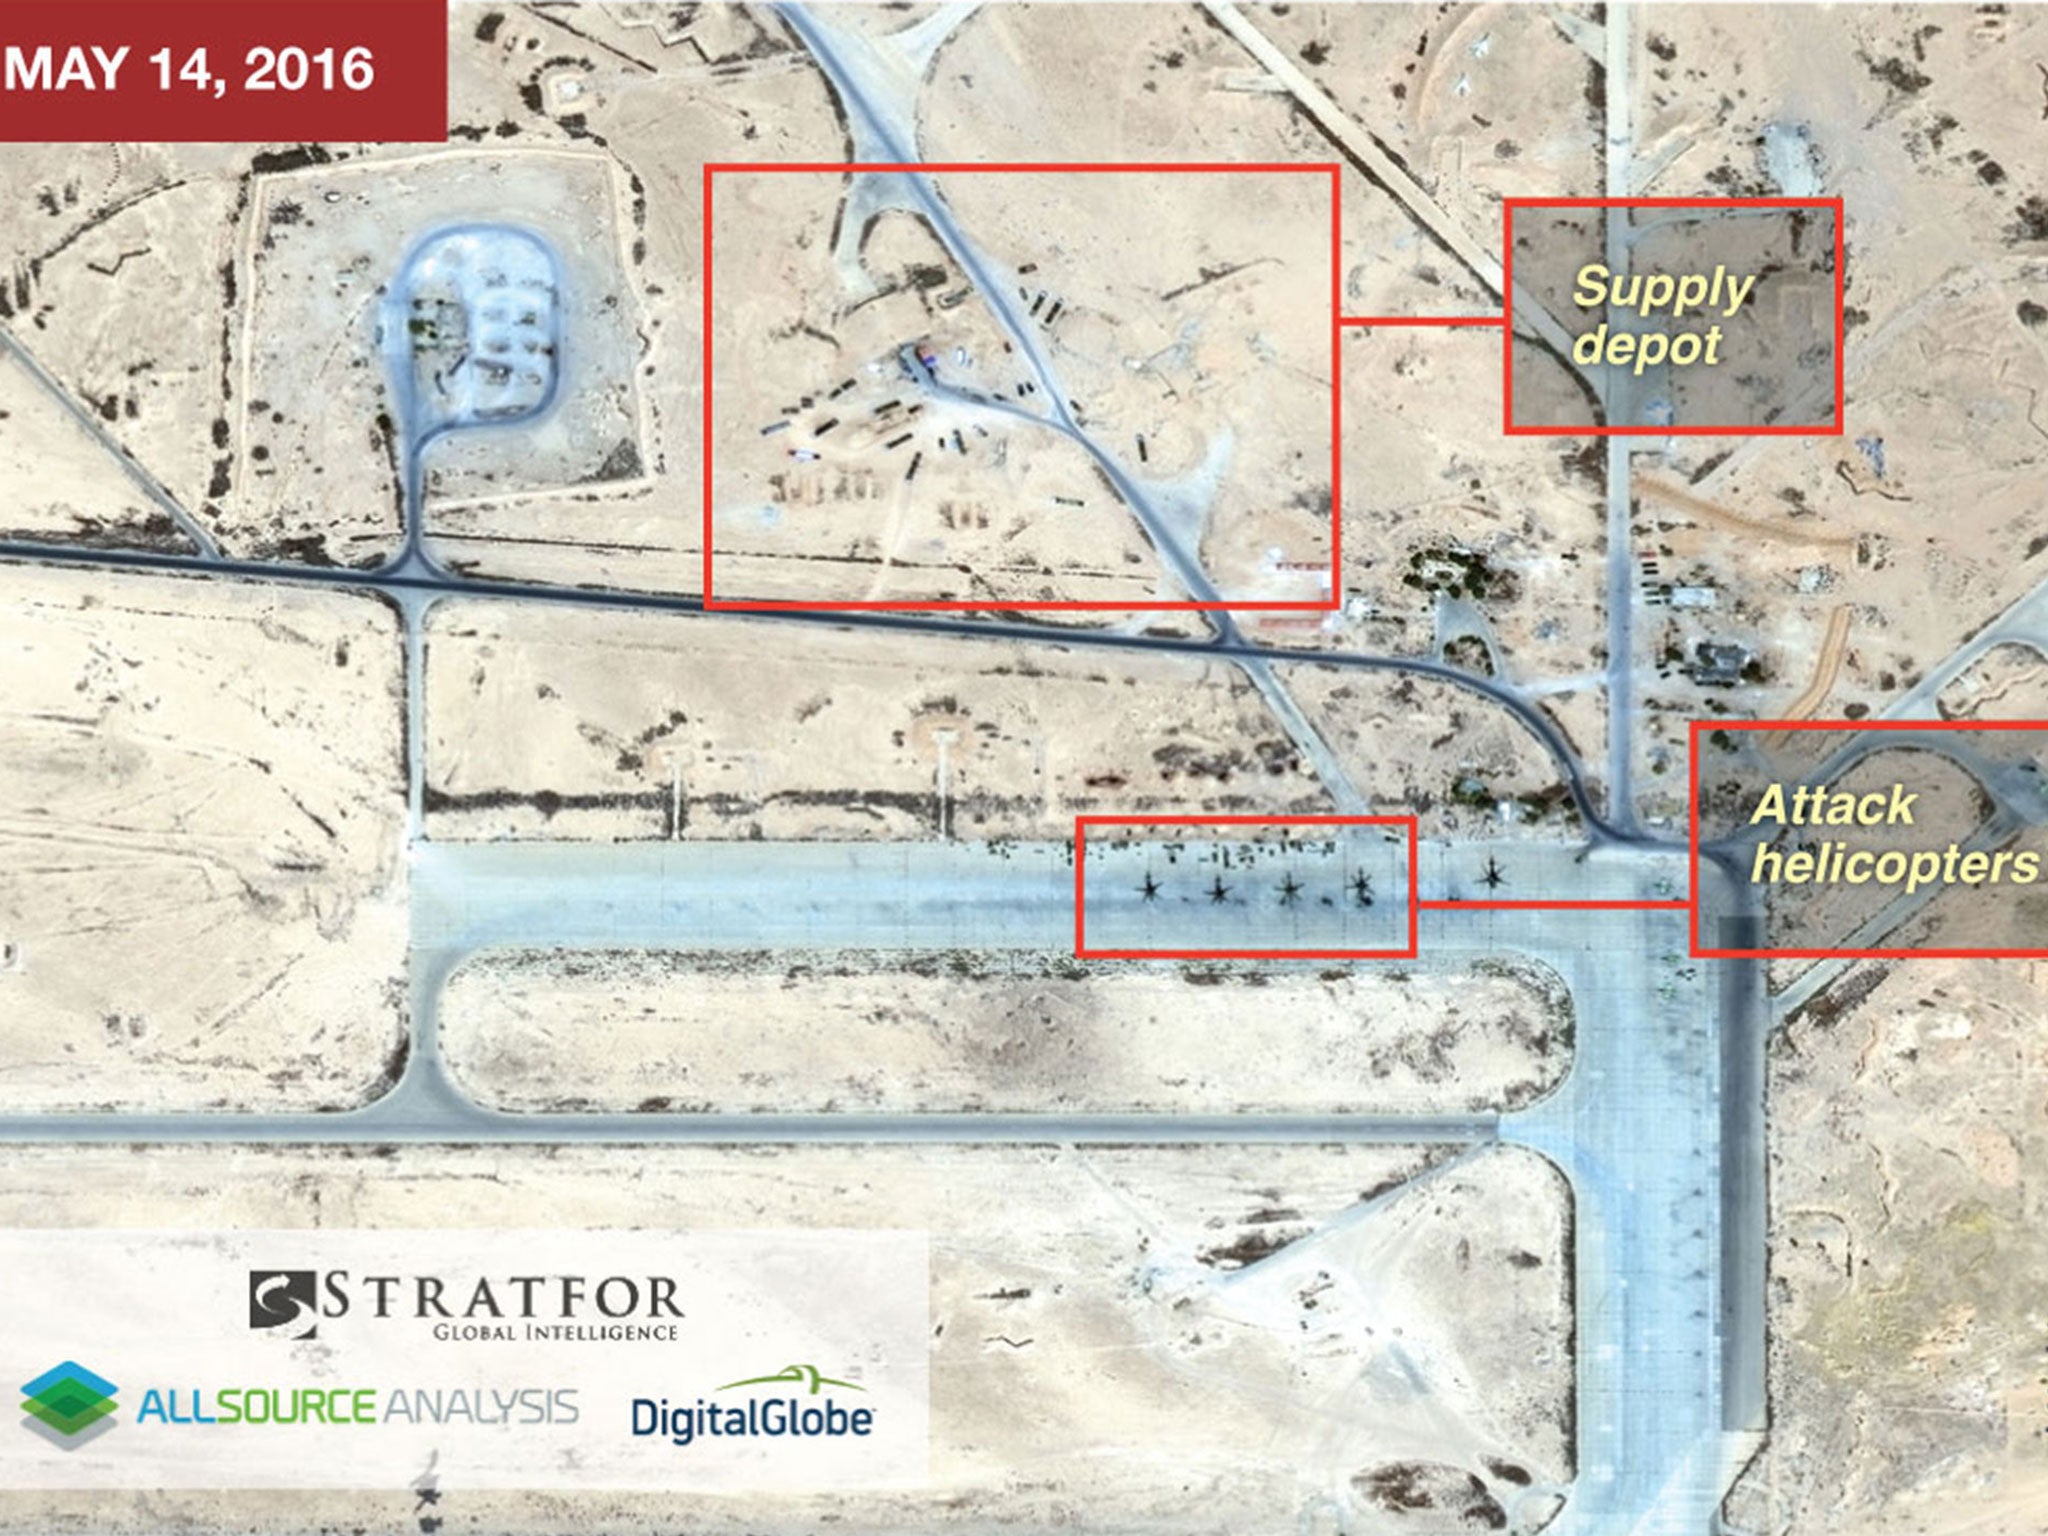 Satellite images acquired by Stratfor and taken on 14 May show the T4 base in Homs province before the fire